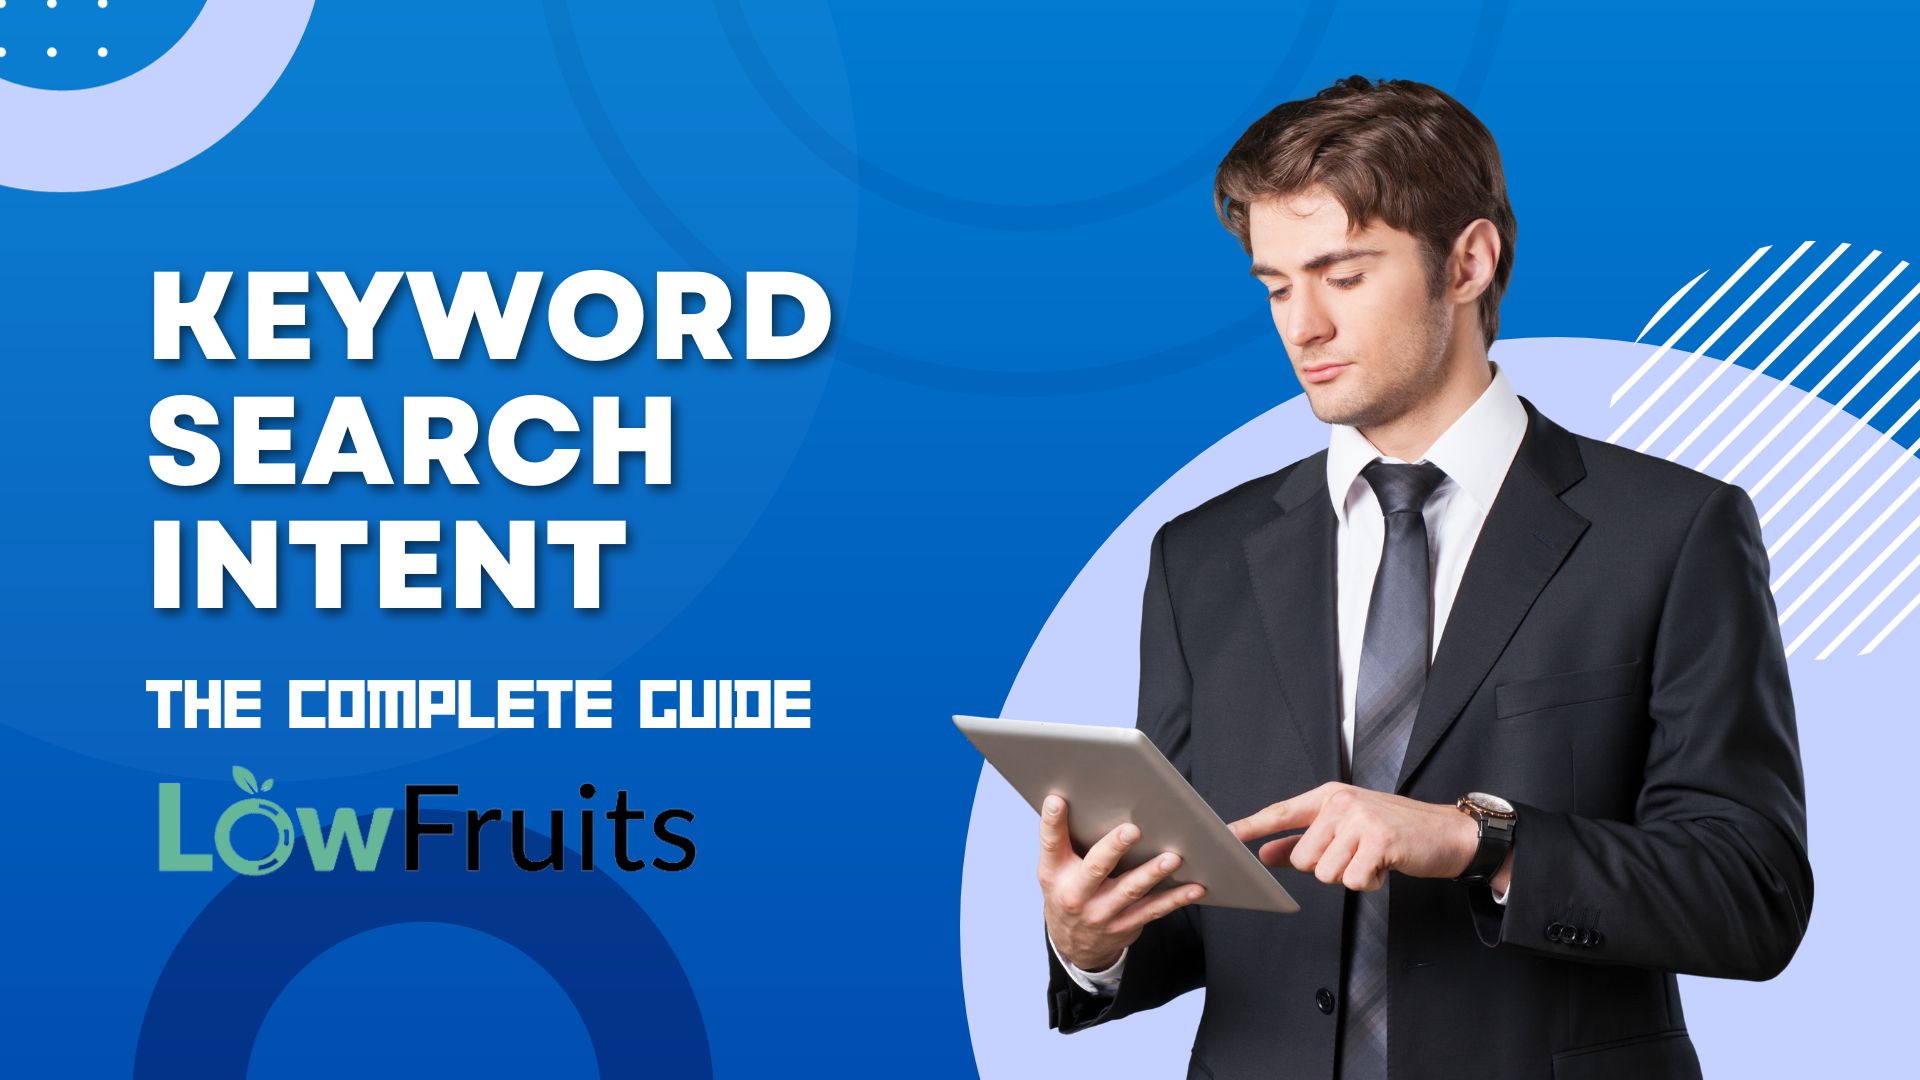 Guide, Keyword search intent